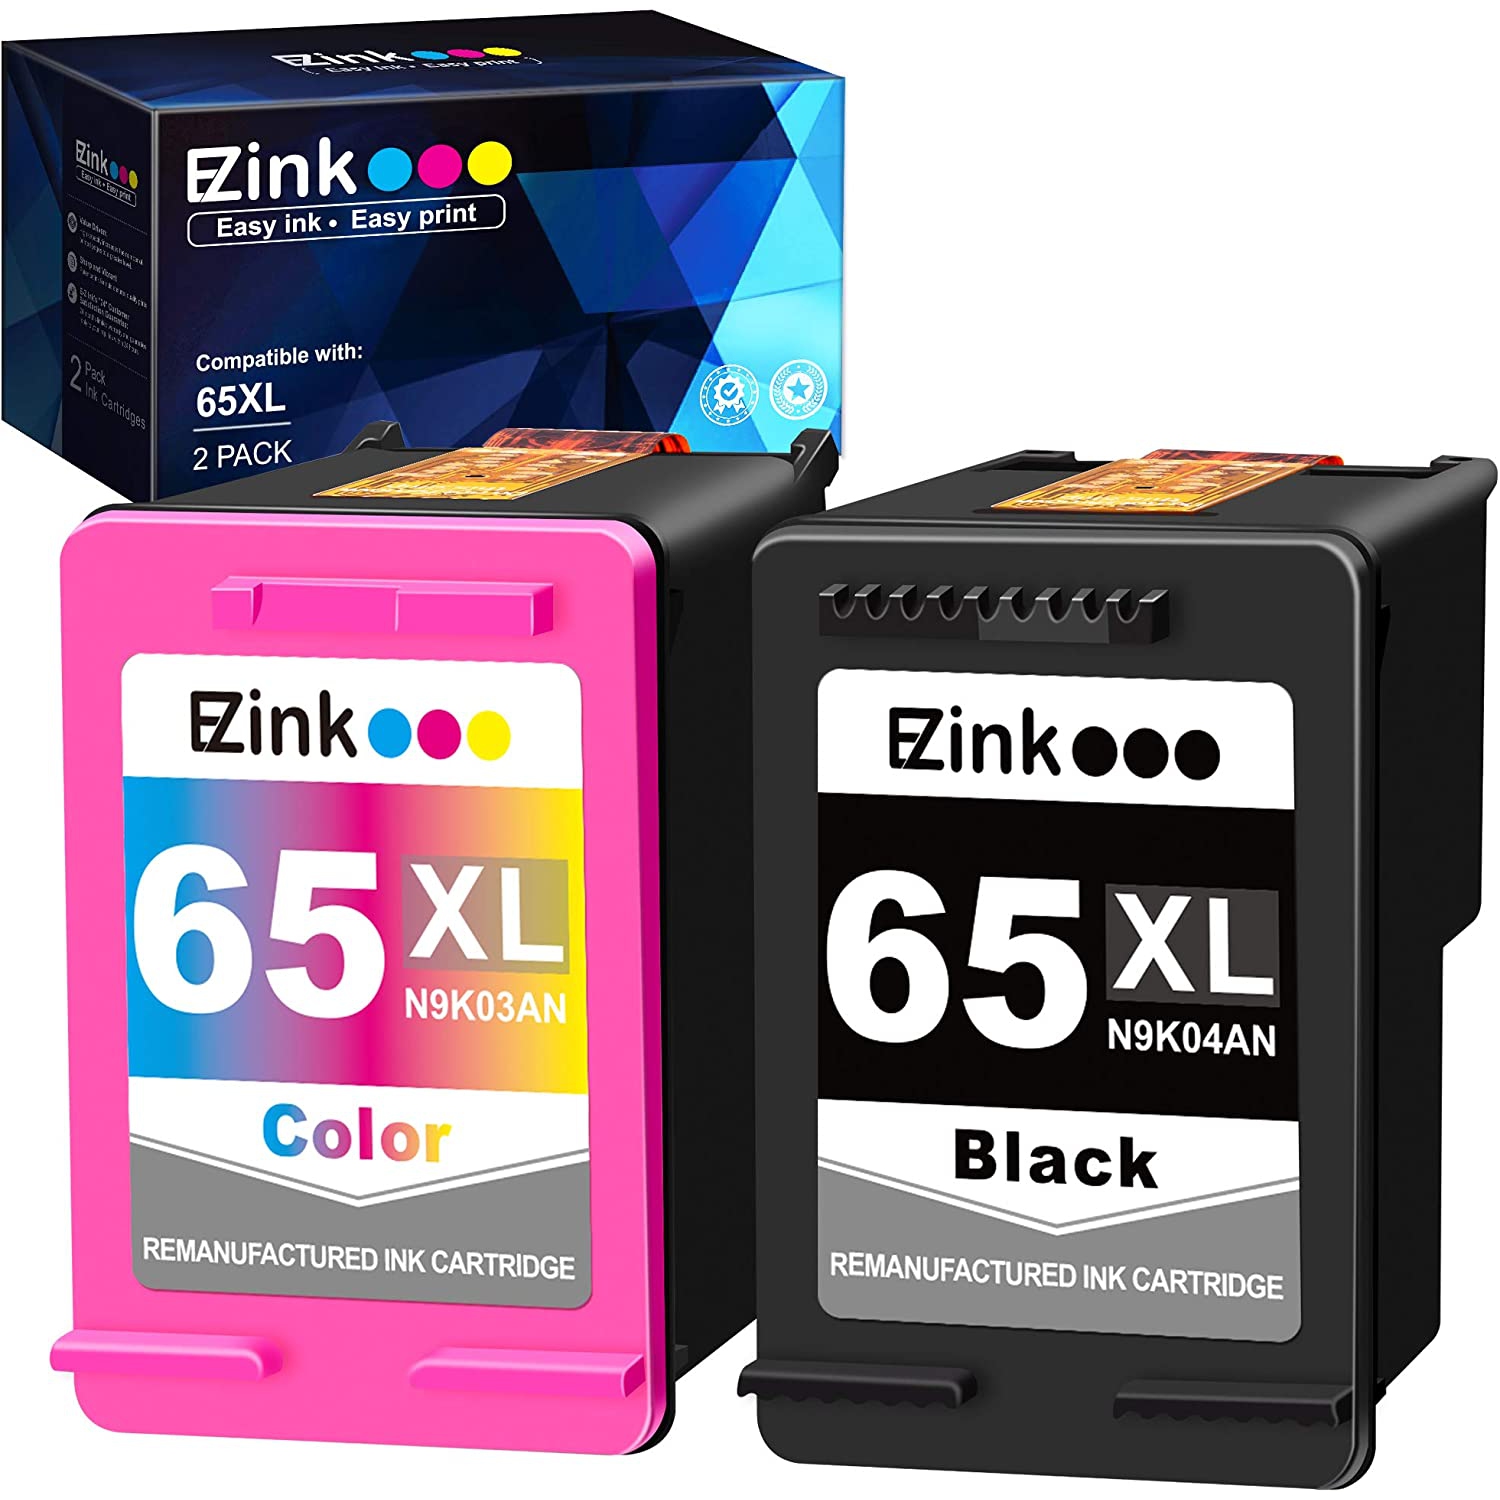 (TM) Remanufactured Ink Cartridge Replacement for HP 65 65XL 65 XL to use with Envy 5055 5052 5058 DeskJet 2622